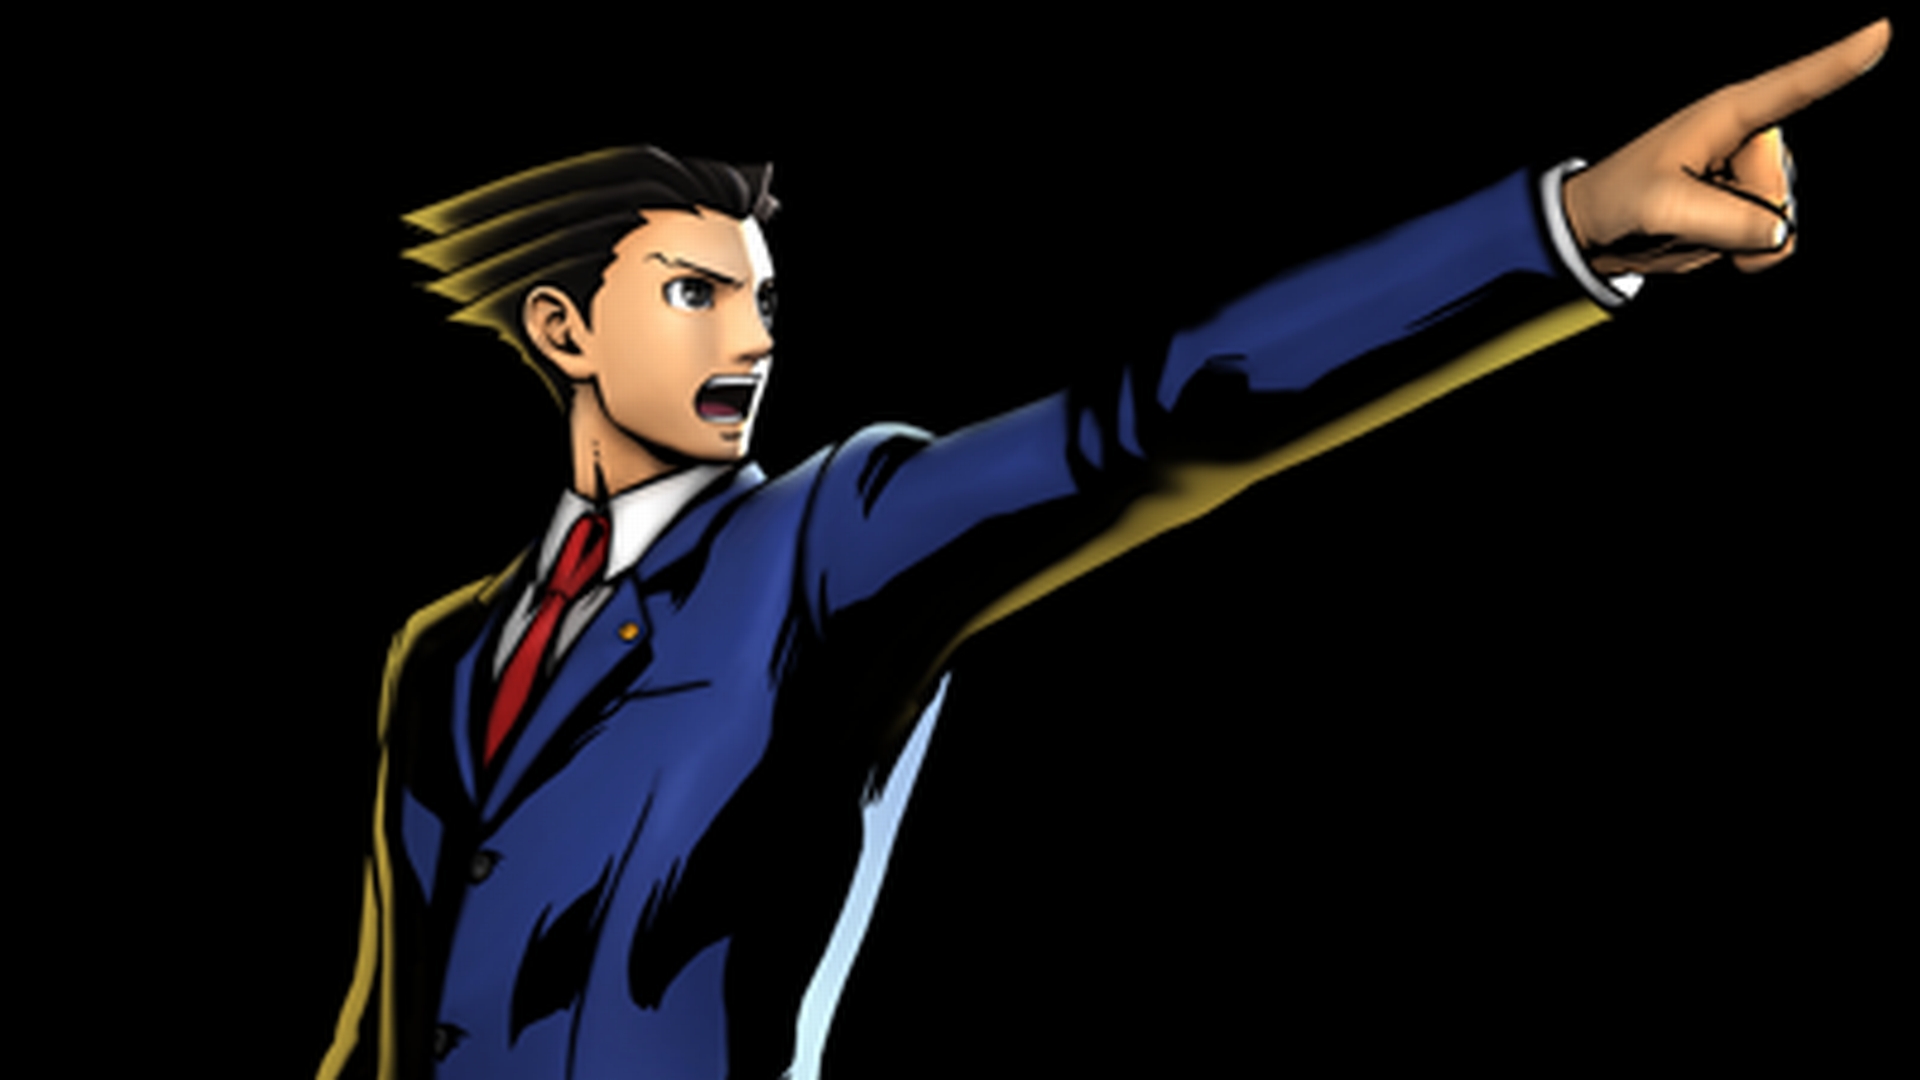 20 Phoenix Wright Ace Attorney HD Wallpapers